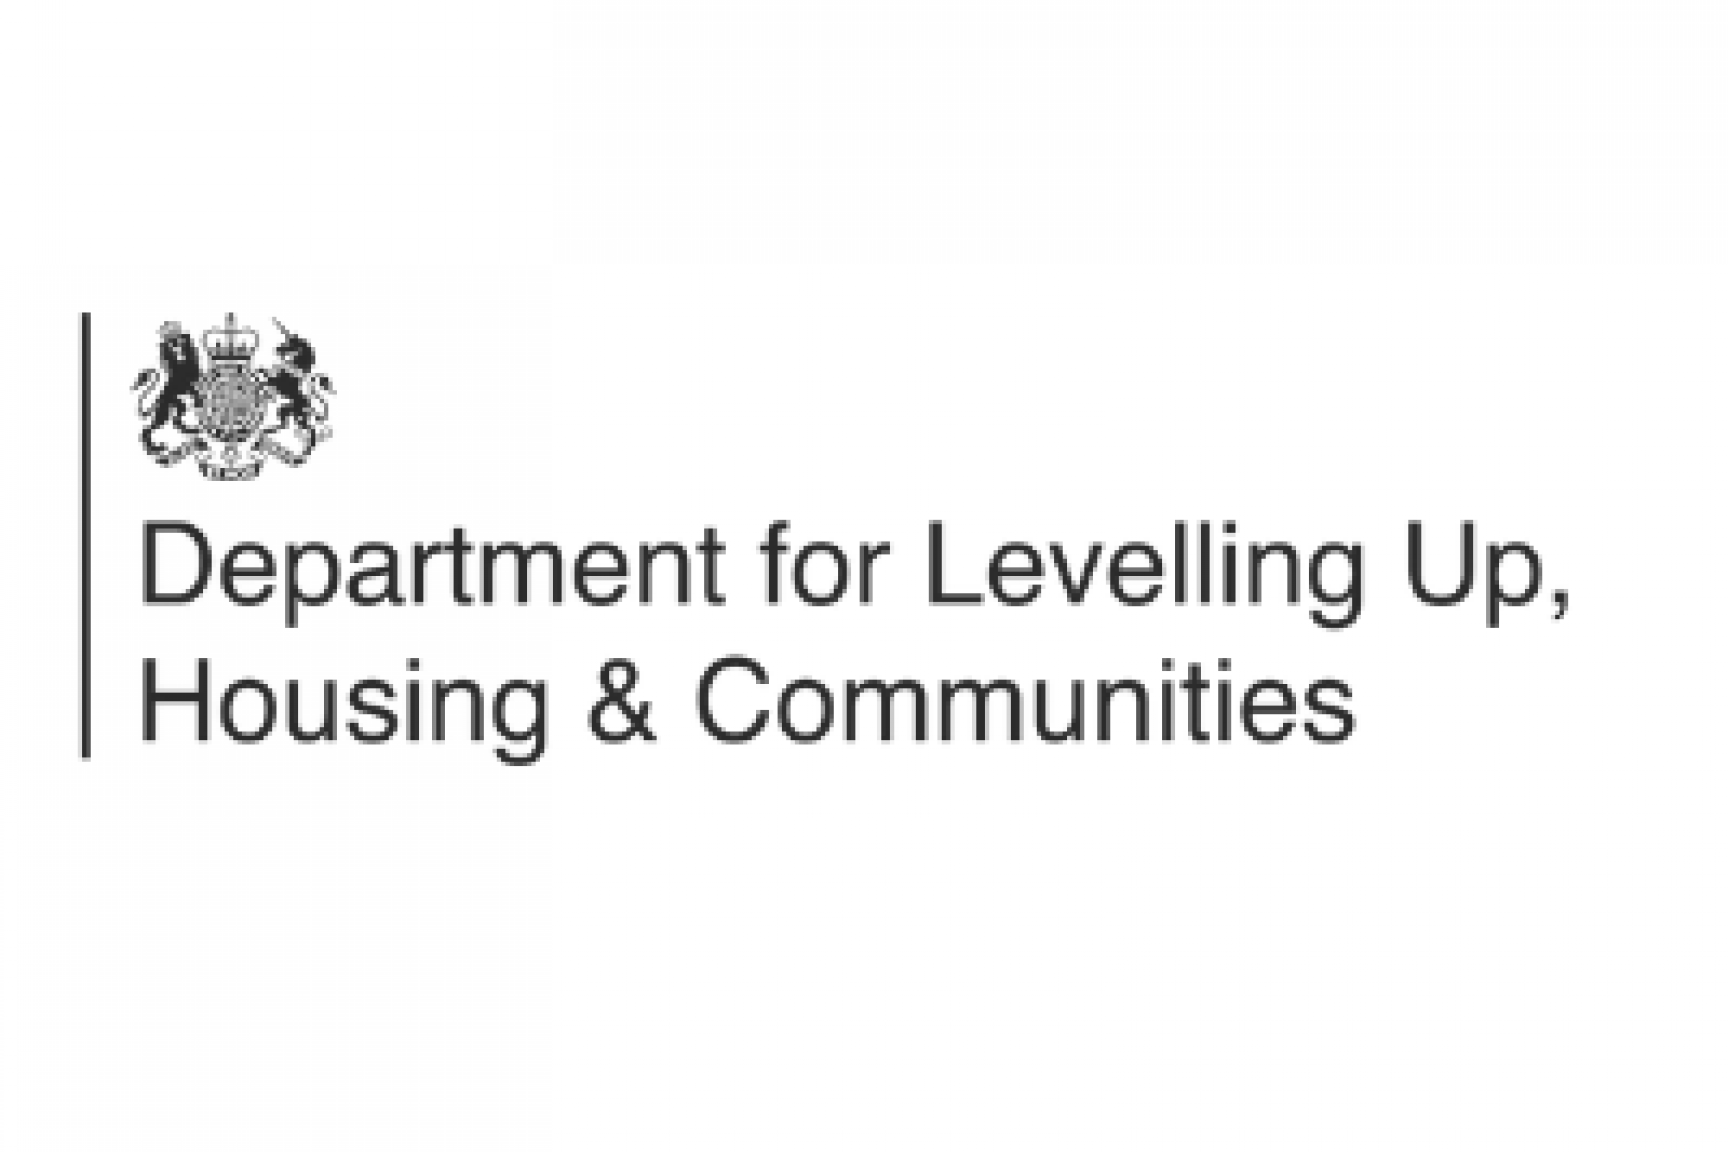 Department for levelling up, housing and communities logo